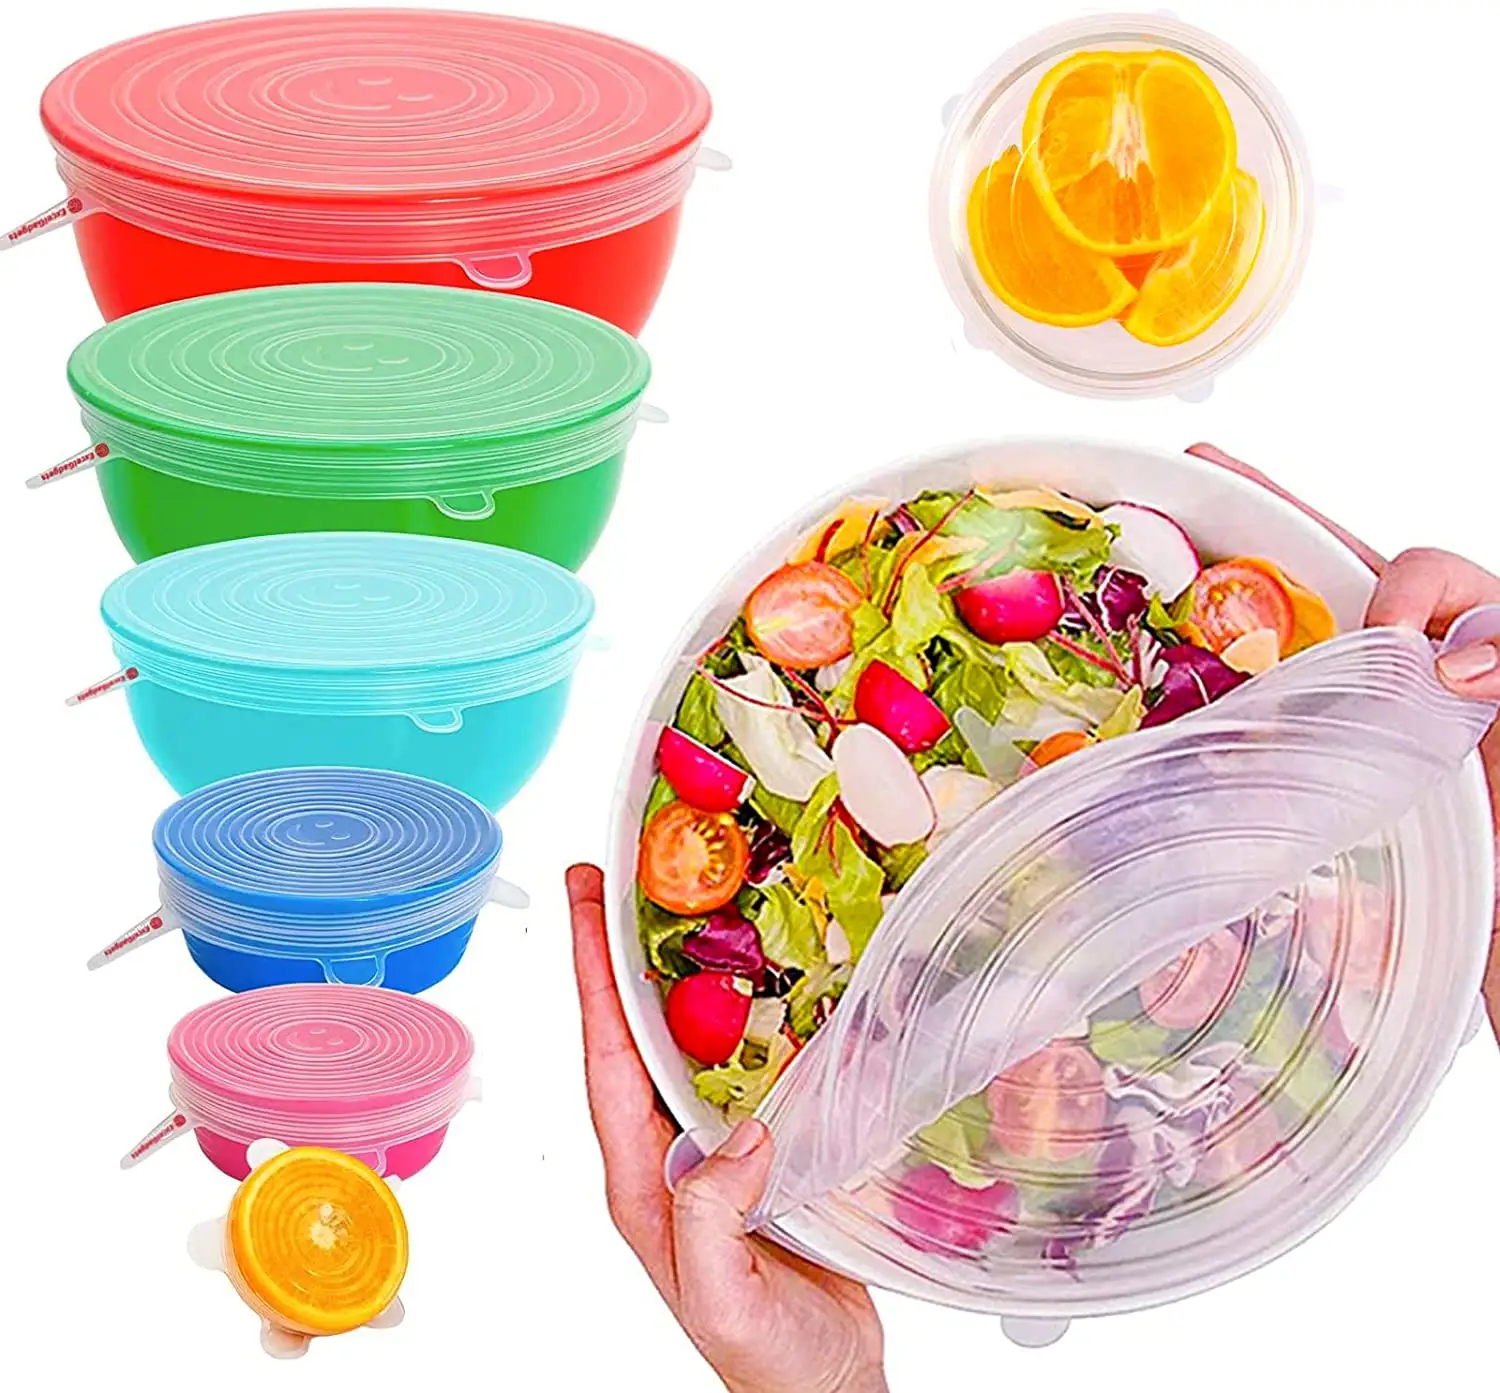 Reusable Durable Food Storage Covers for Bowl Food Grade Silicone Stretch Lids for All Containers BPA Free Silicone Stretch Lids